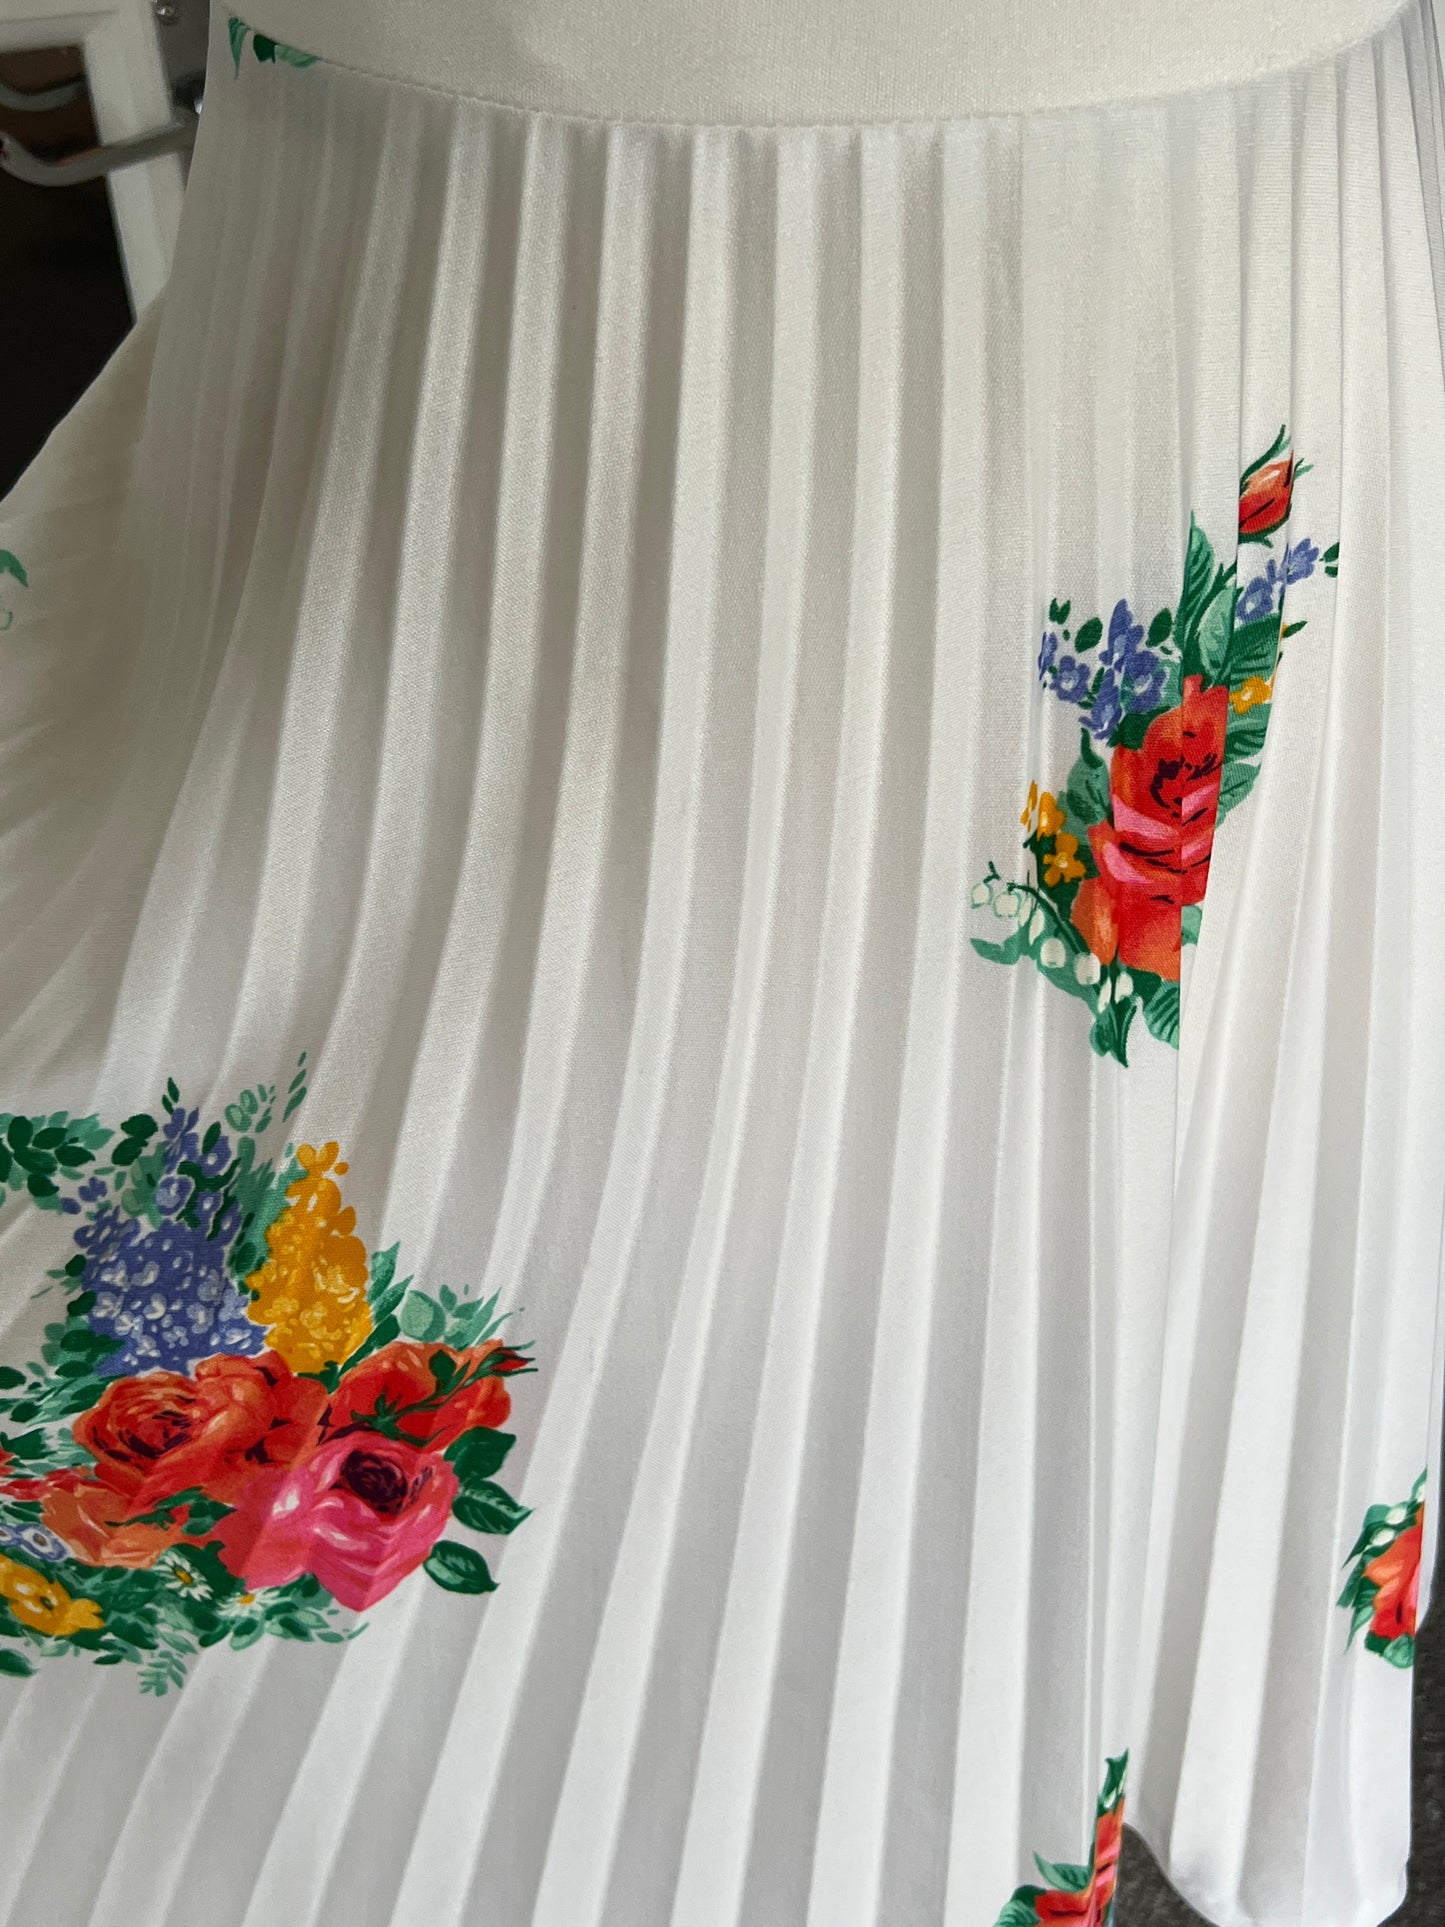 Vintage 1970s deep v neck white with red roses dress permanently pleated so M